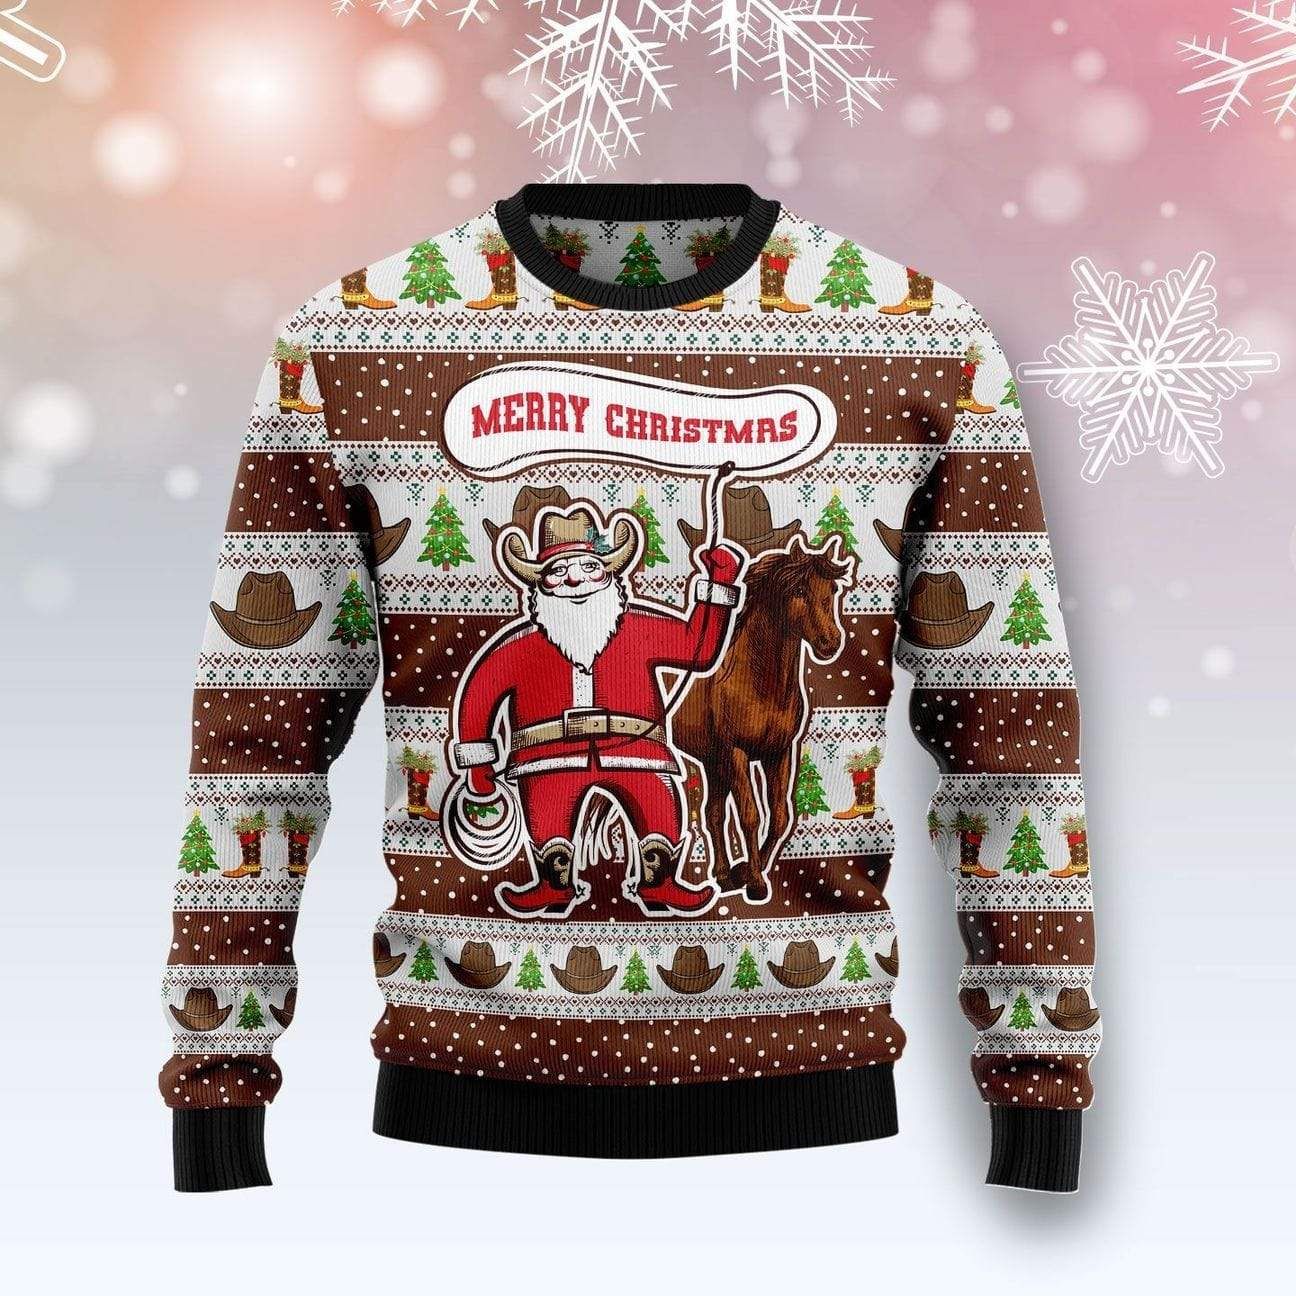 Christmas Santa Claus Is A Real Cowboy Sweater